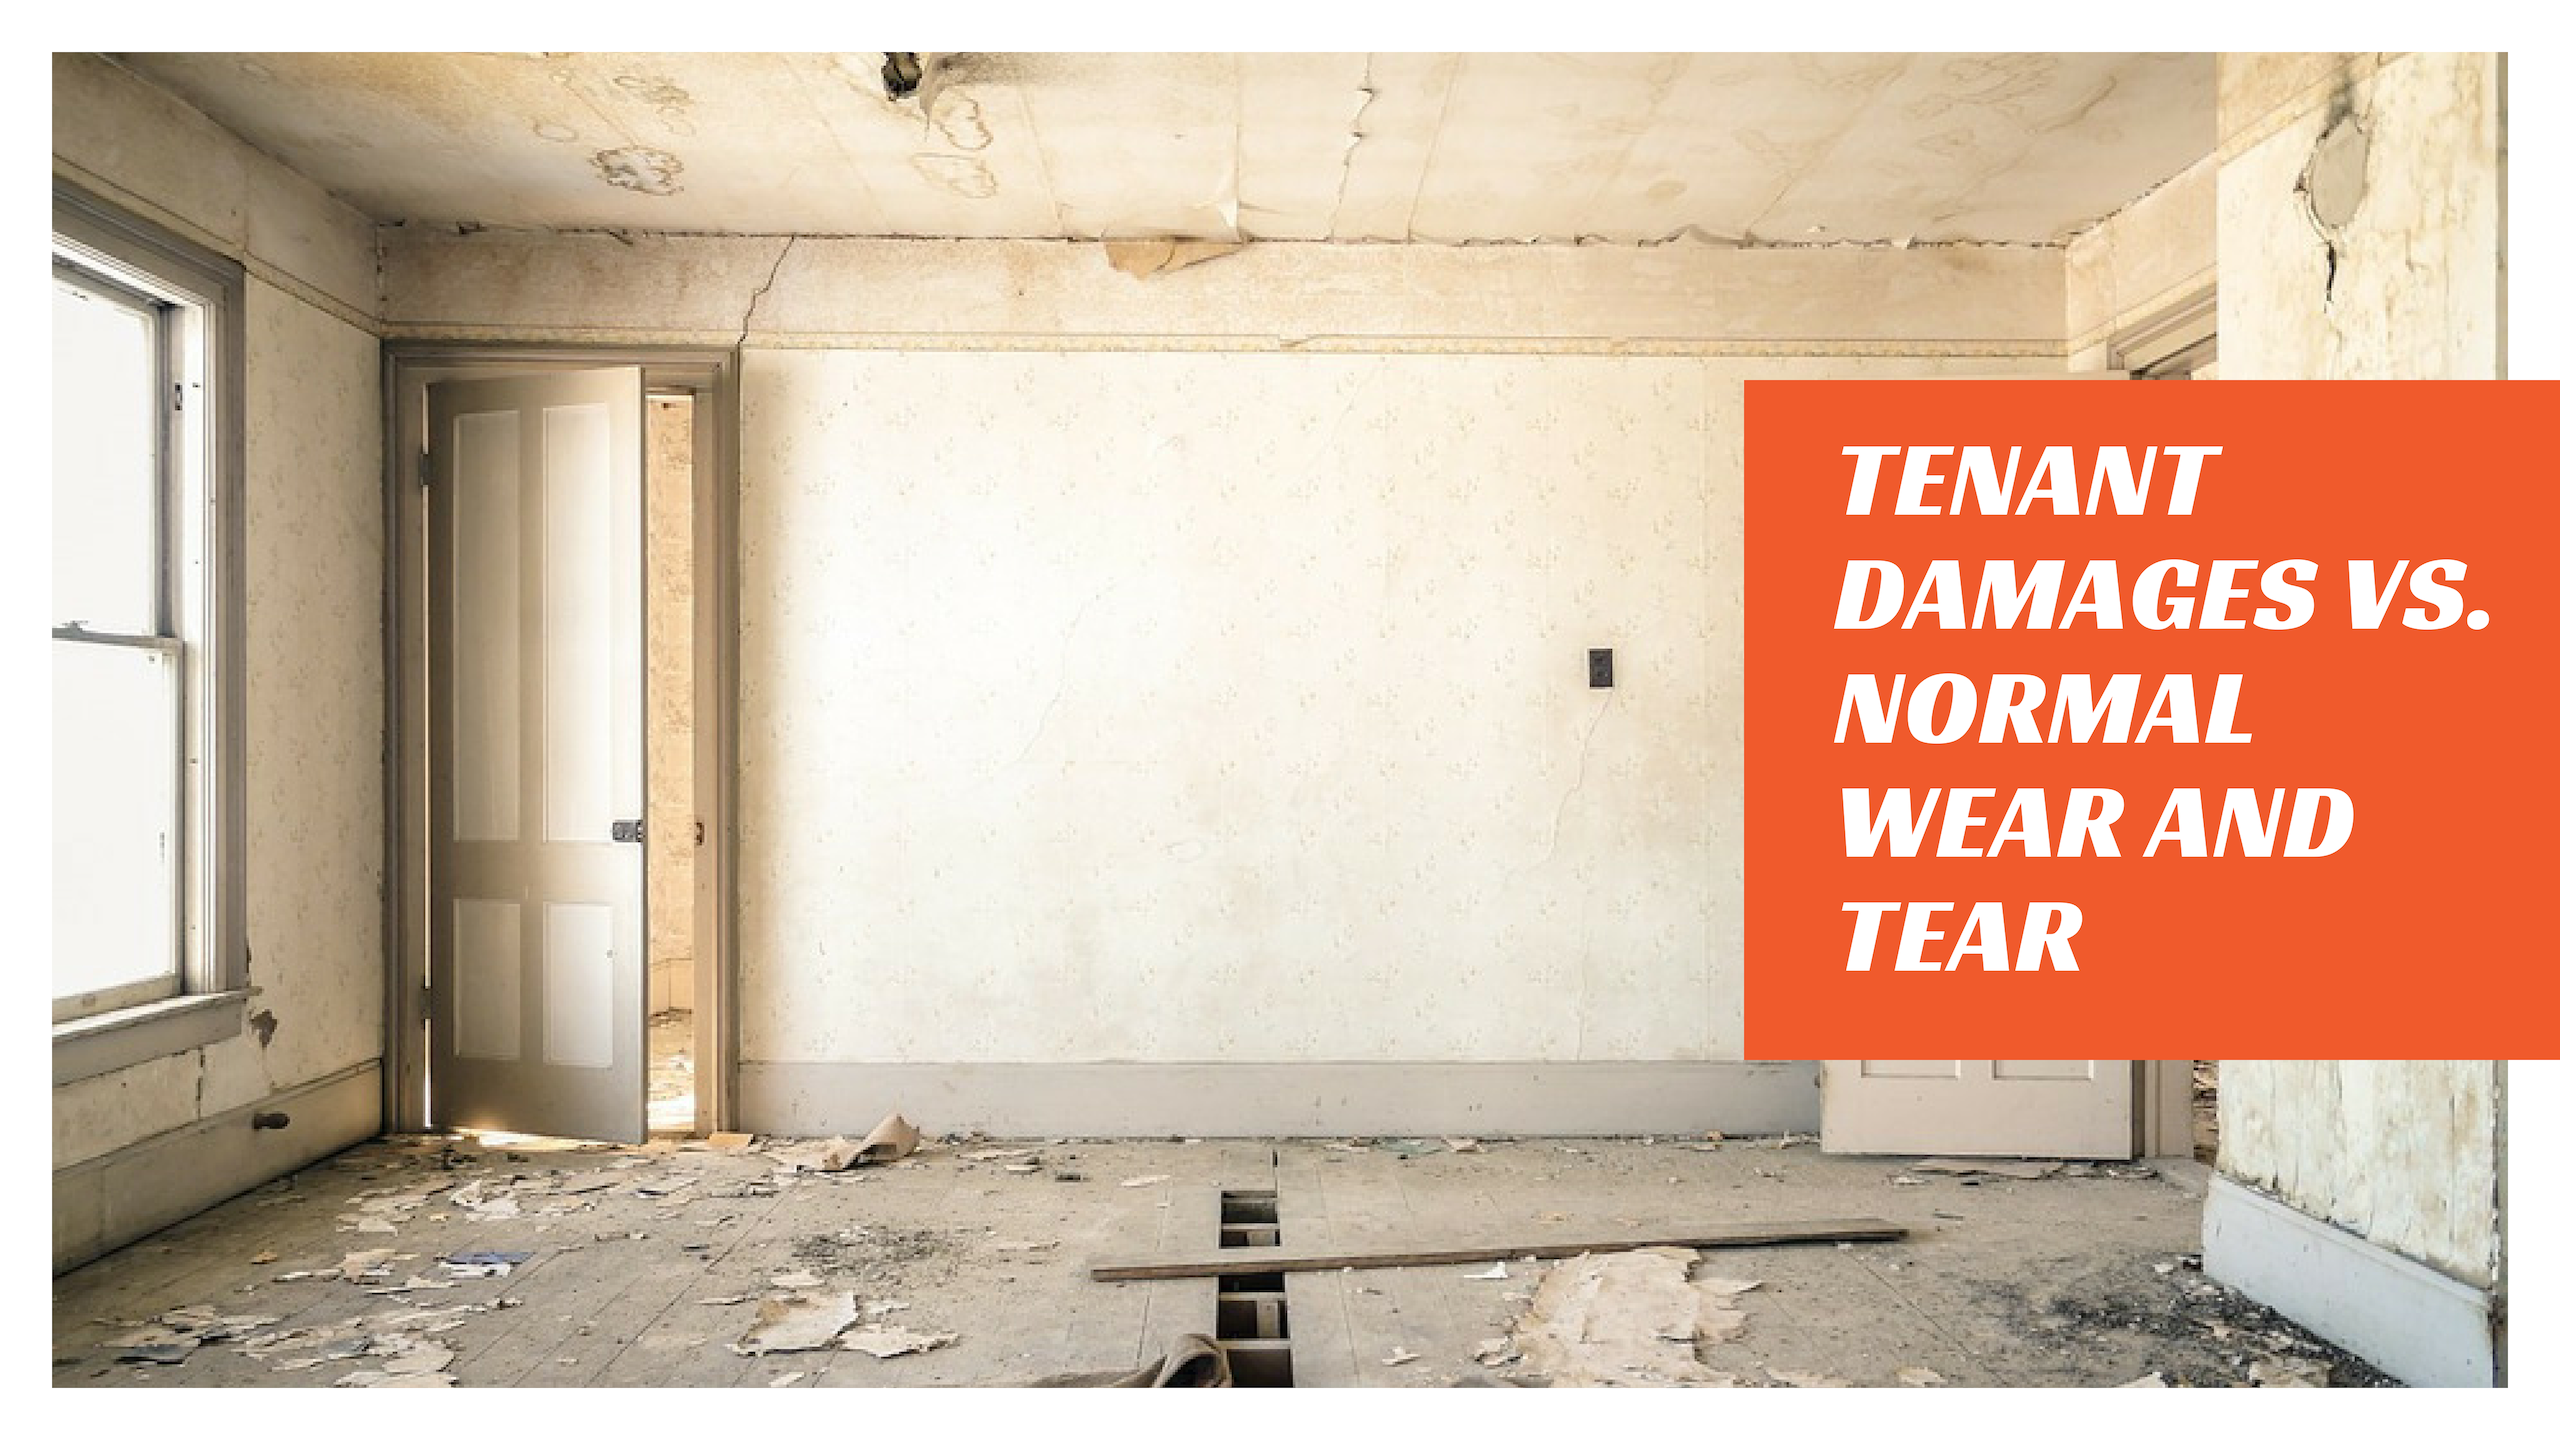 Is it Normal Tenant Wear and Tear?